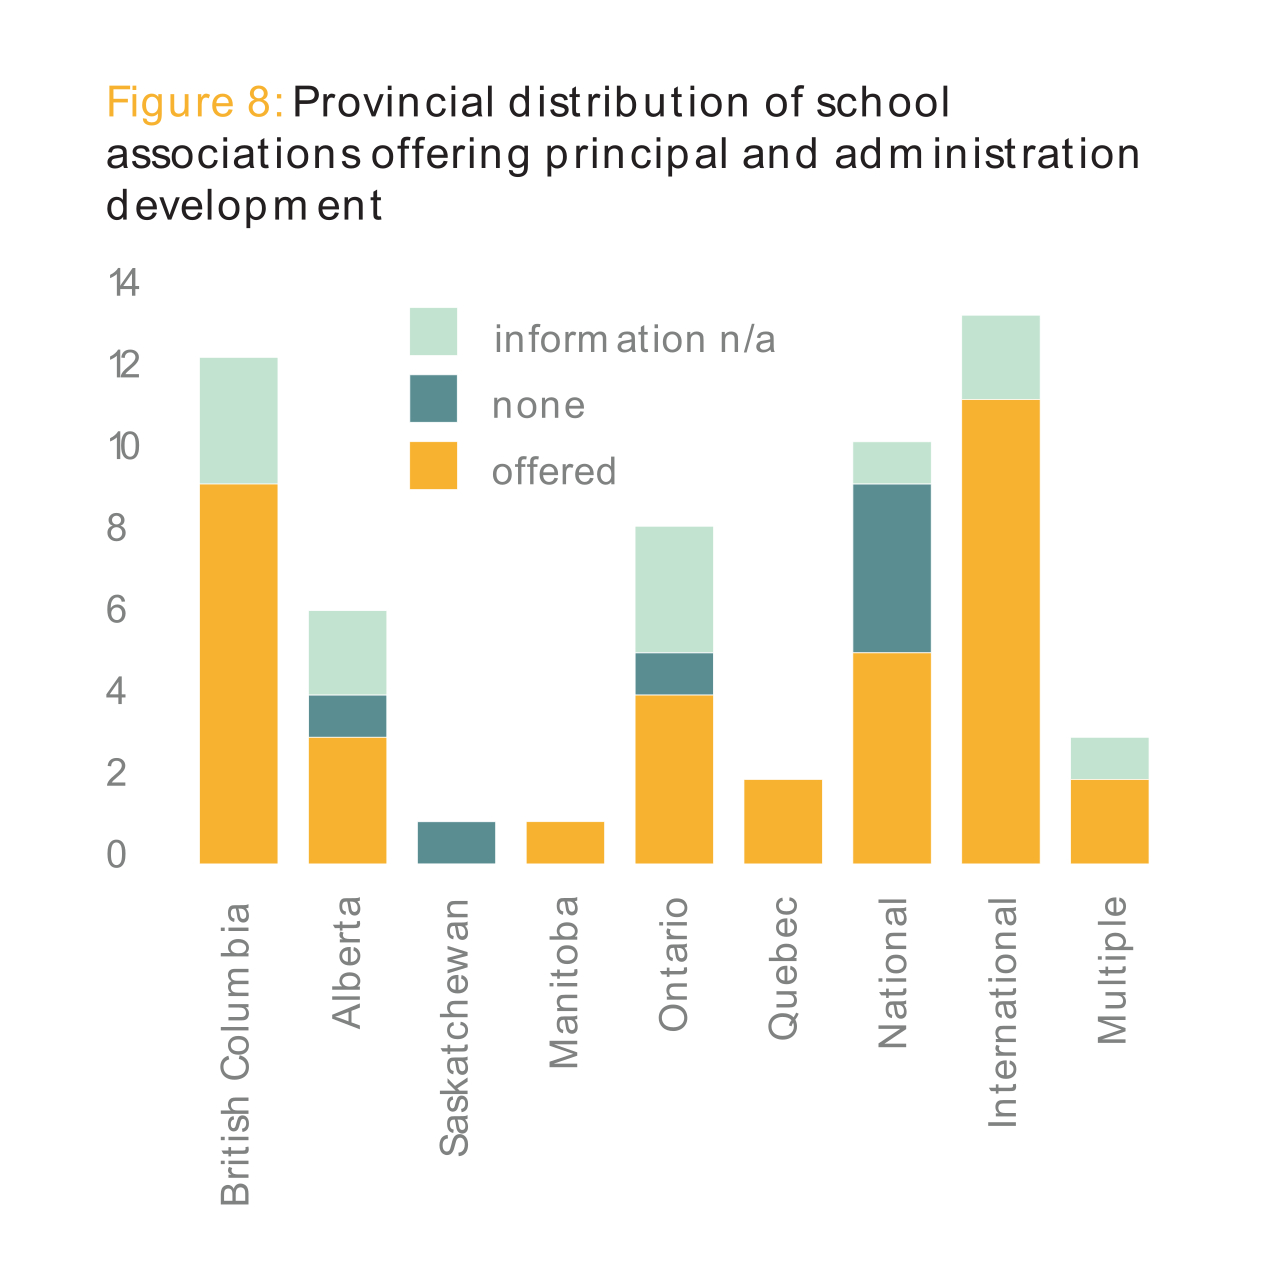 Figure 8: Provincial distribution of school associations offering principal and administration development